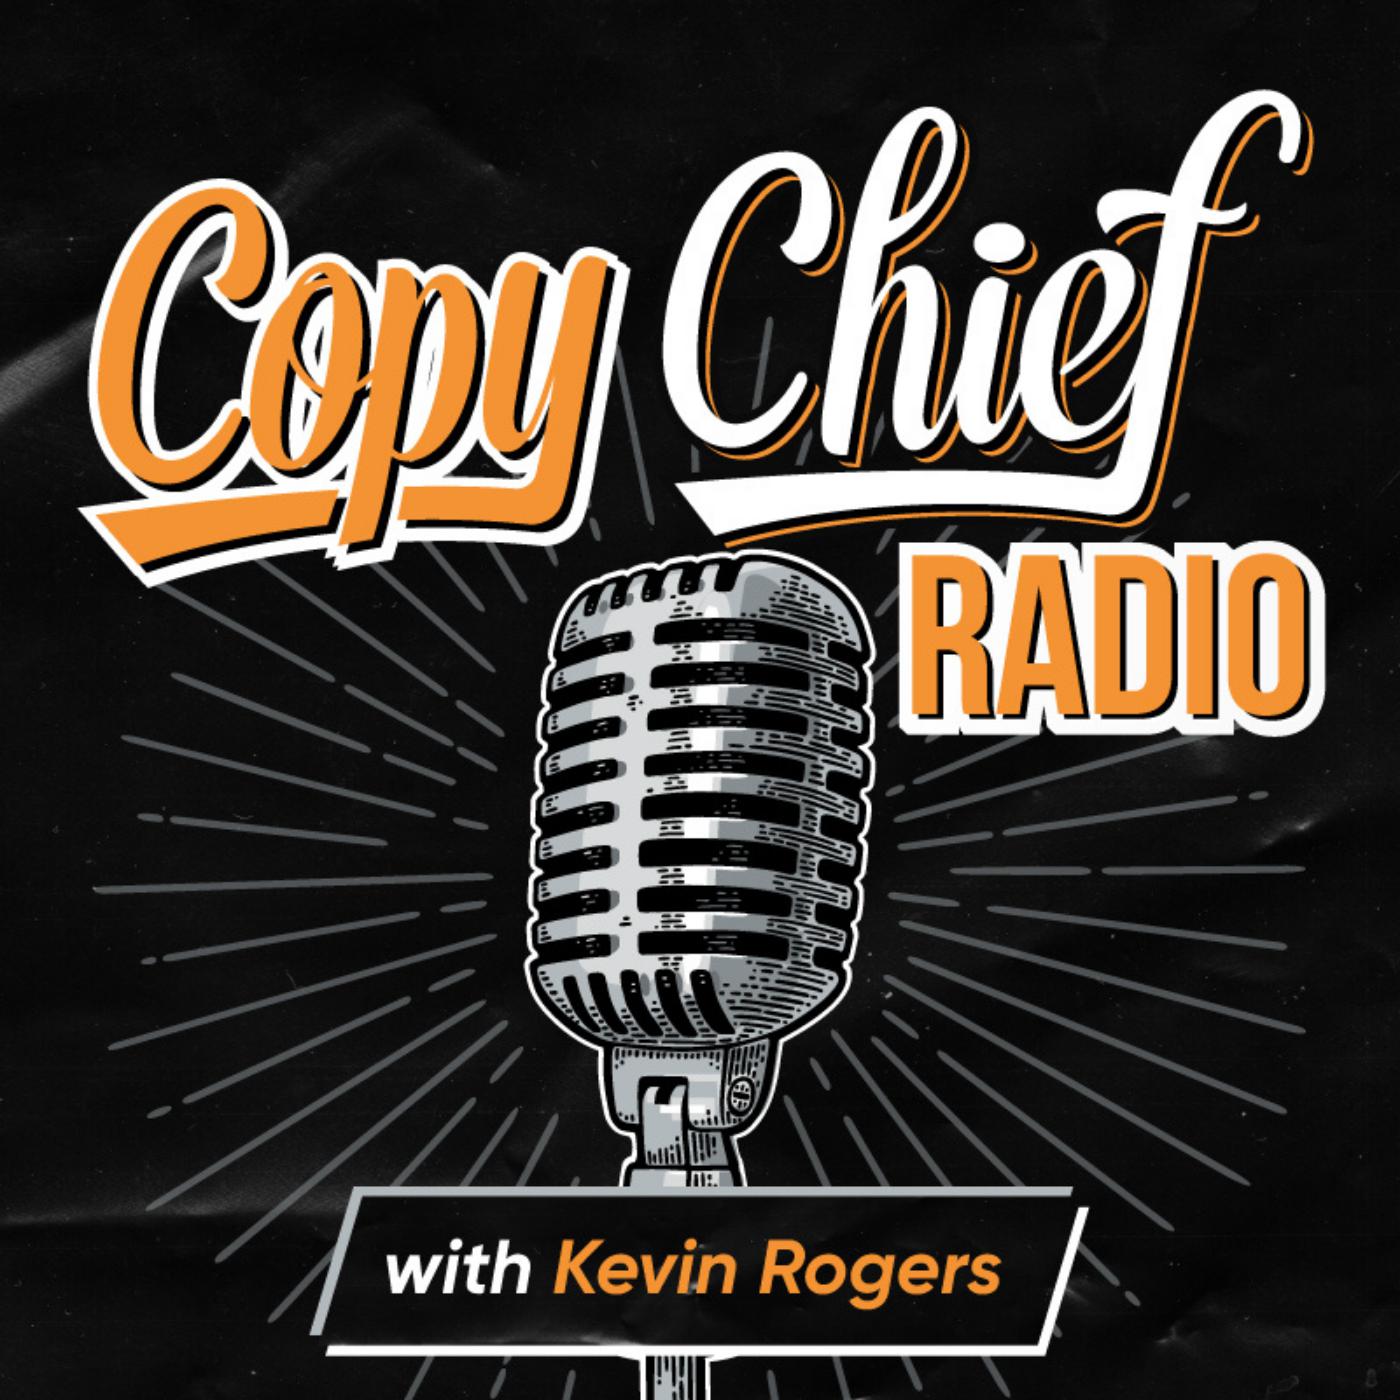 Copy Chief Radio with Kevin Rogers